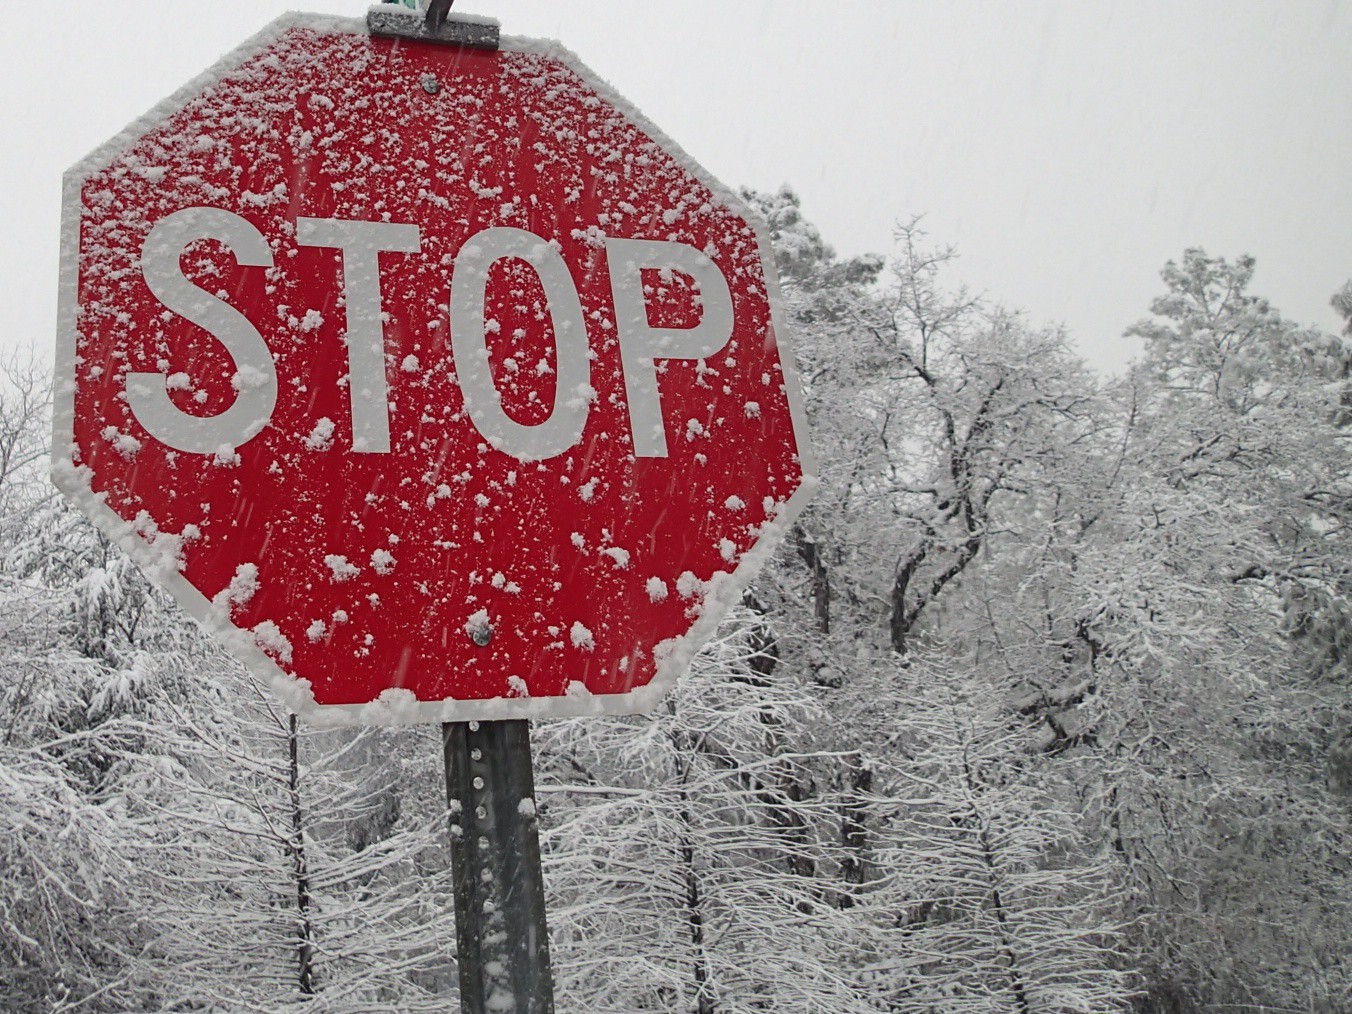 A STOP sign covered with snow flakes and behind it a wintery scene of snow covered trees. Believe it or not, this is in Arizona!